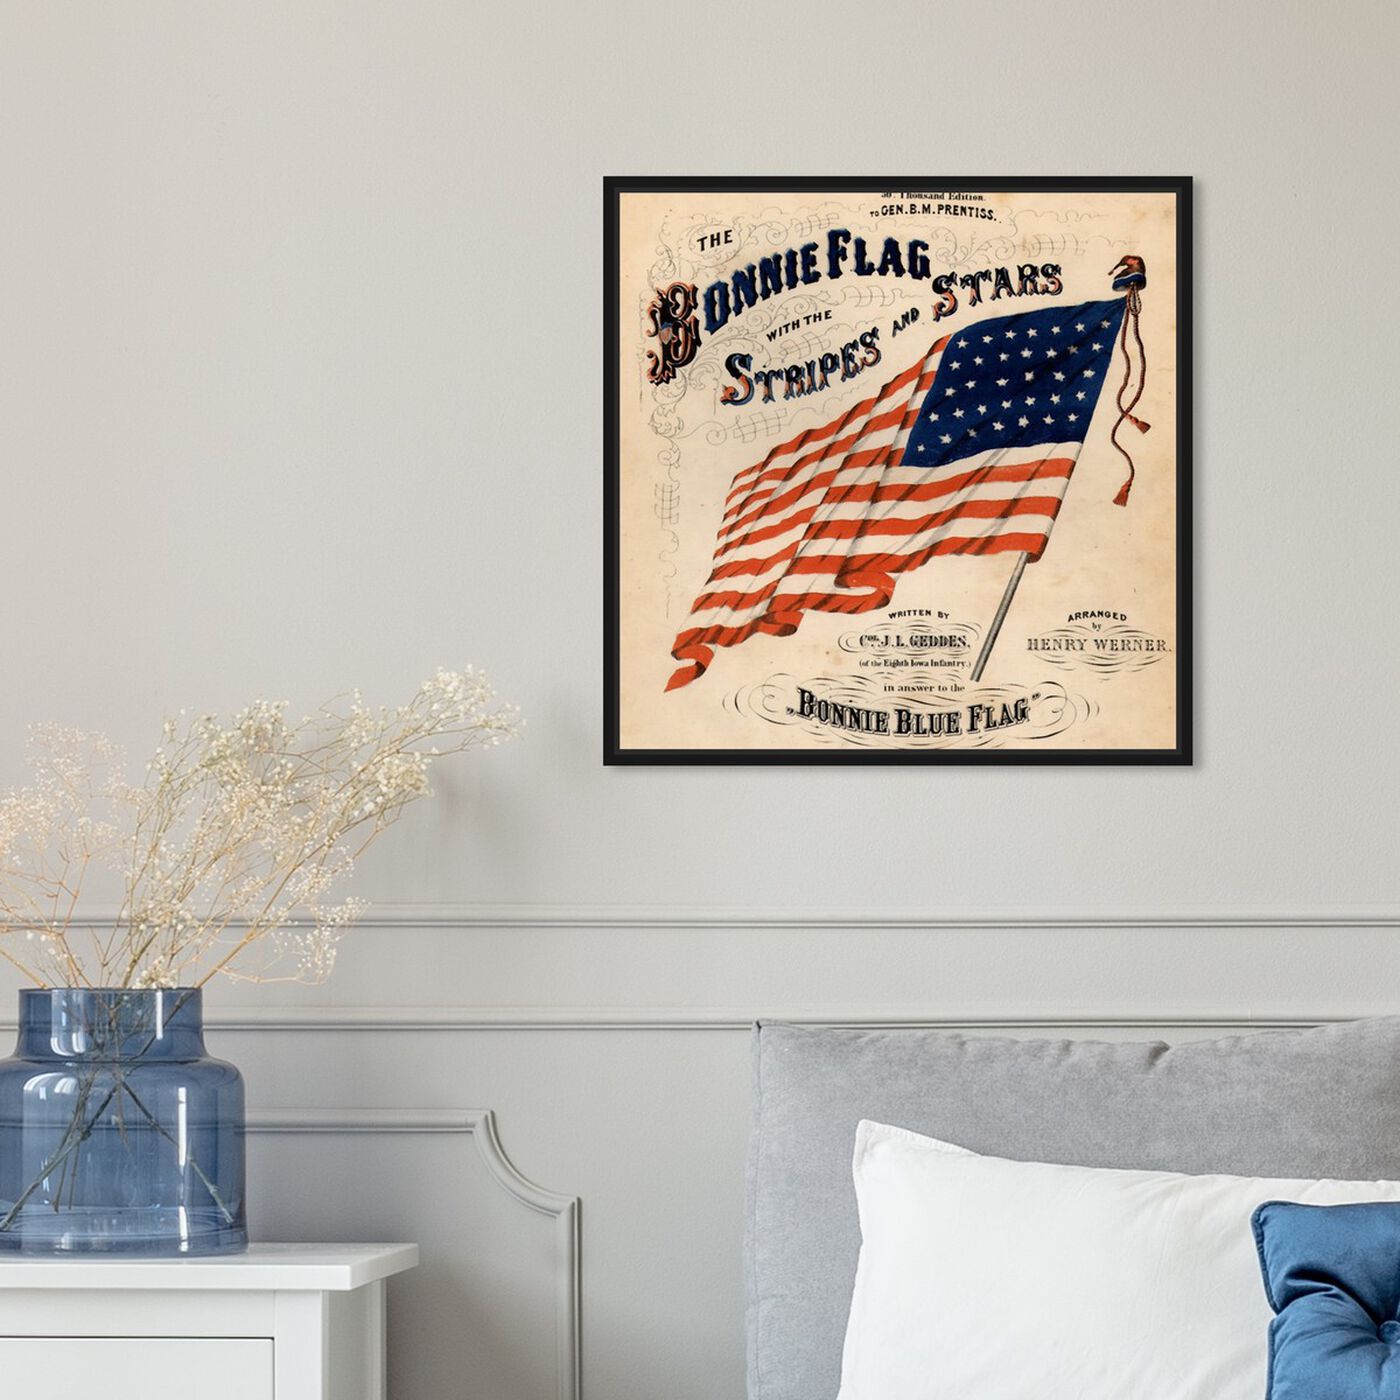 Hanging view of Bonnie Flag featuring americana and patriotic and us flags art.